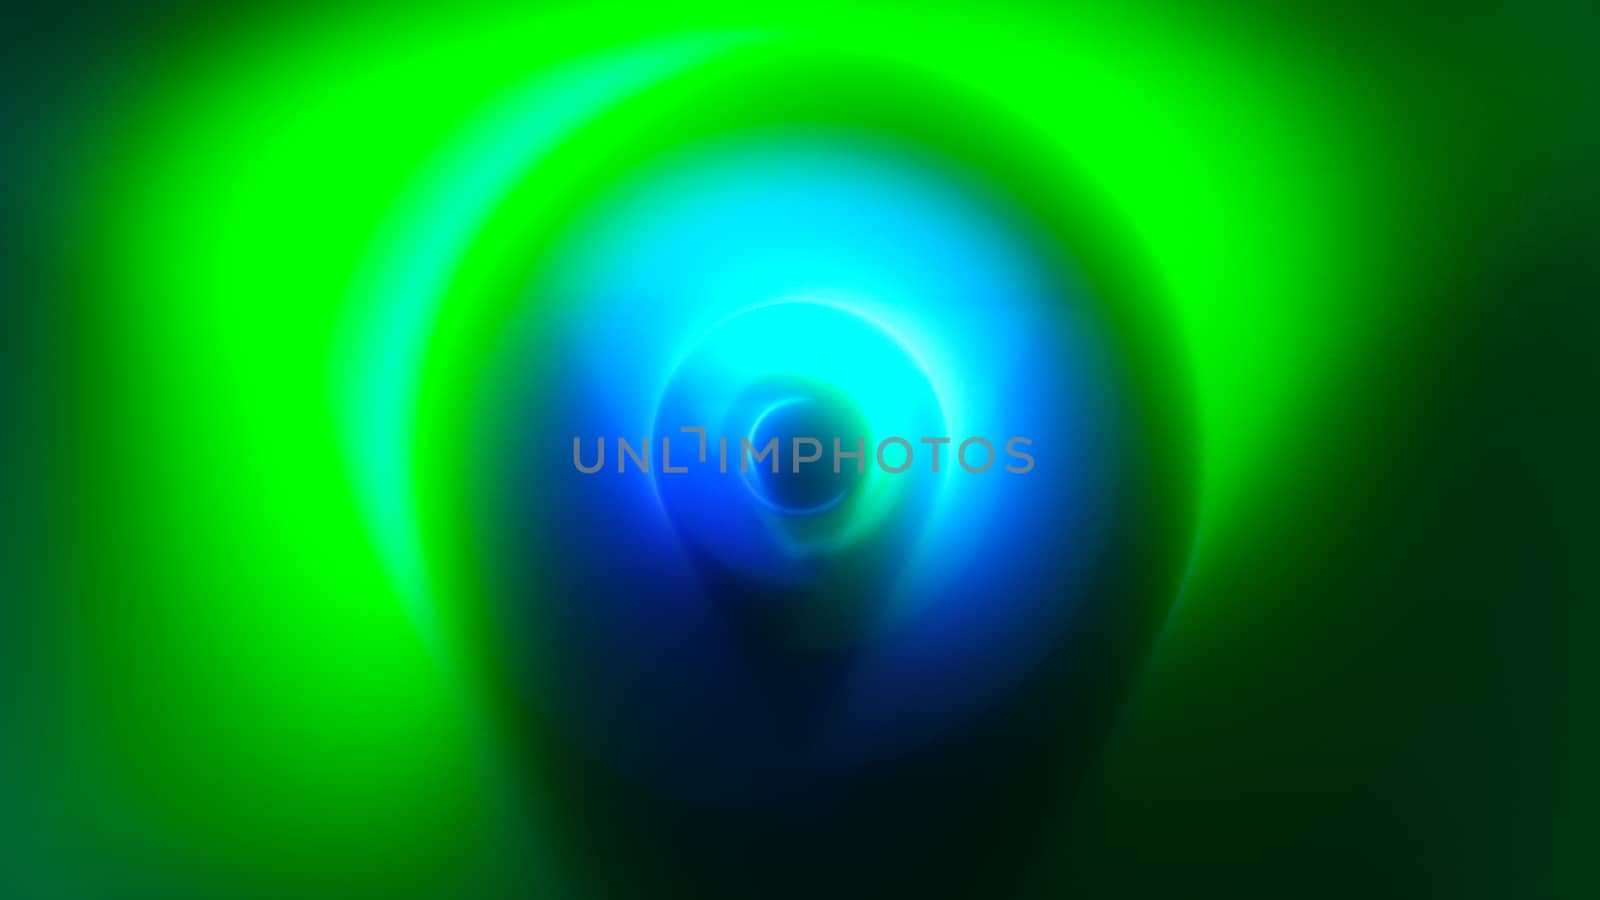 Abstract background of colorful spin radial motion blur. 3d rendering